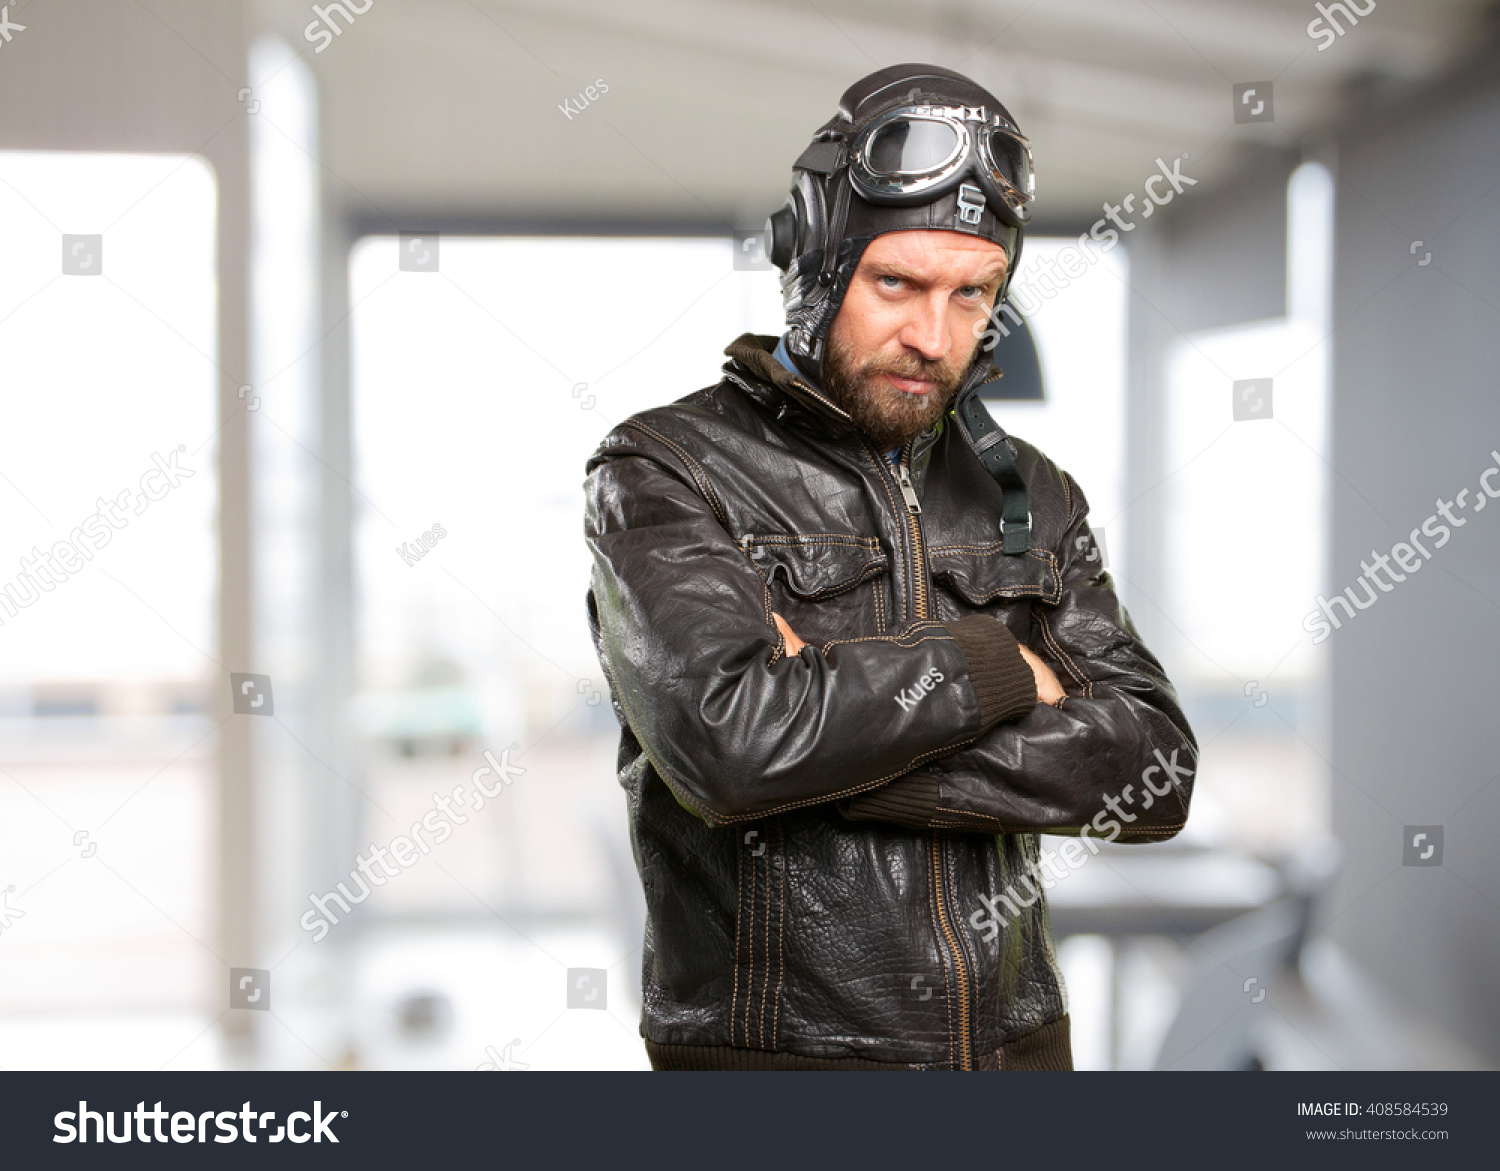 Blond Pilot Angry Expression Stock Photo 408584539 | Shutterstock